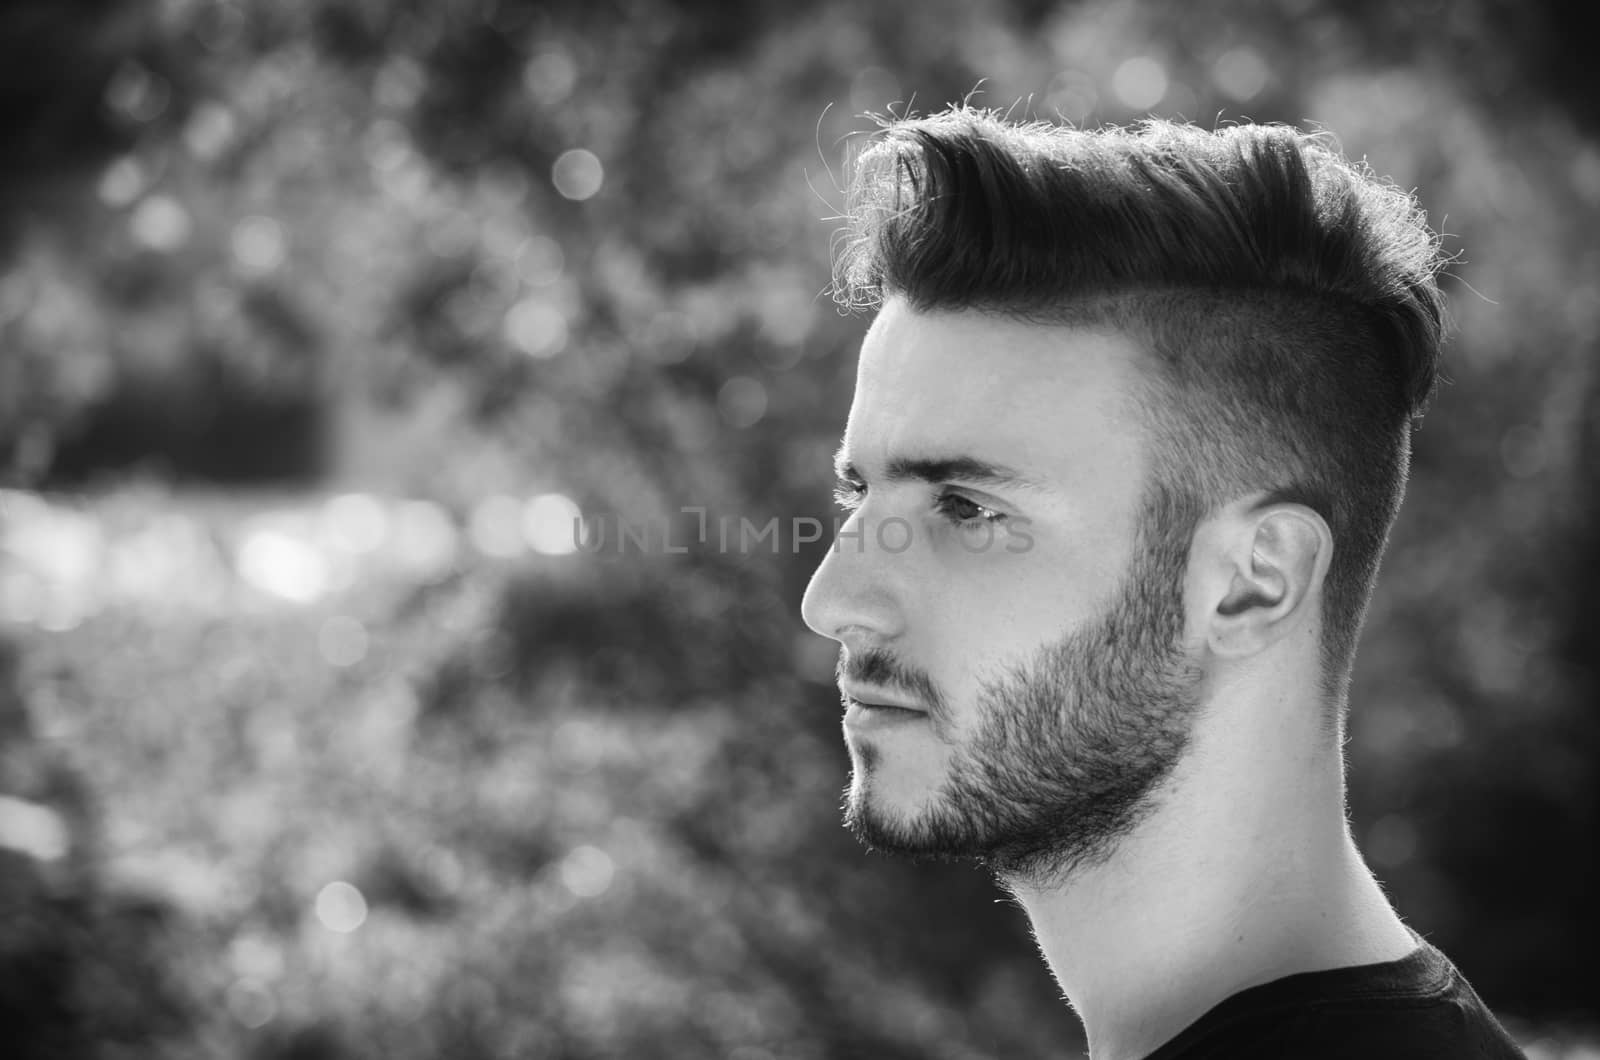 Profile portrait of handsome young man outdoors in nature, looking to a side, black and white shot